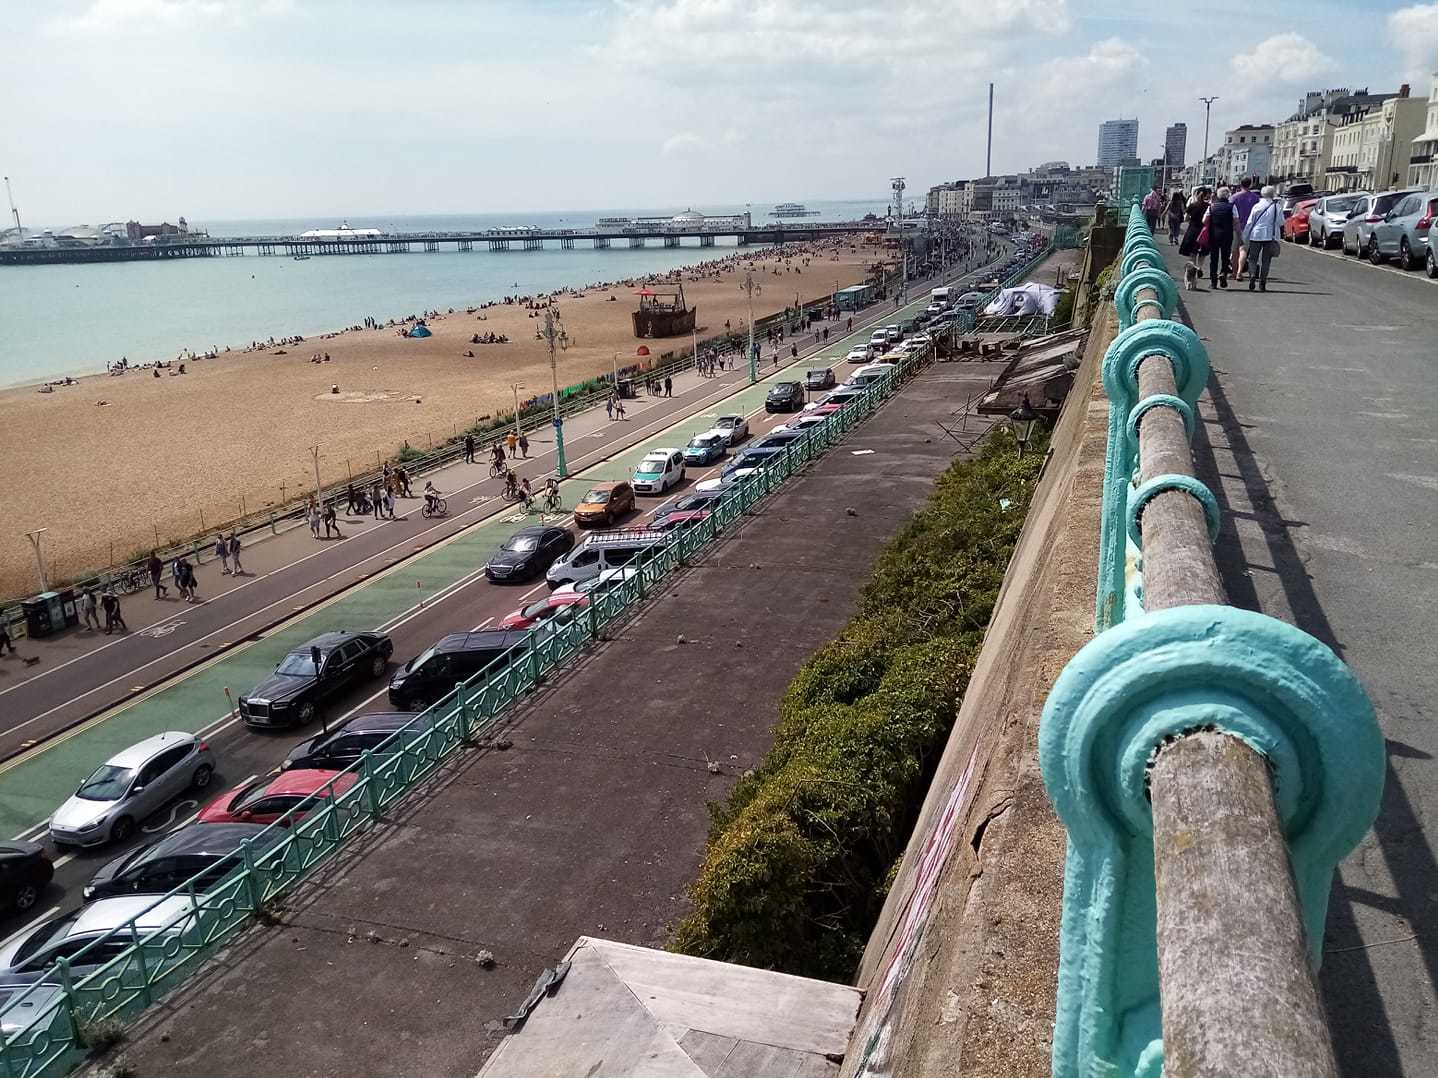 The queue of cars along Madeira Drive - a tent on the crumbling, Grade-II listed Madeira Terrace is also pictured 